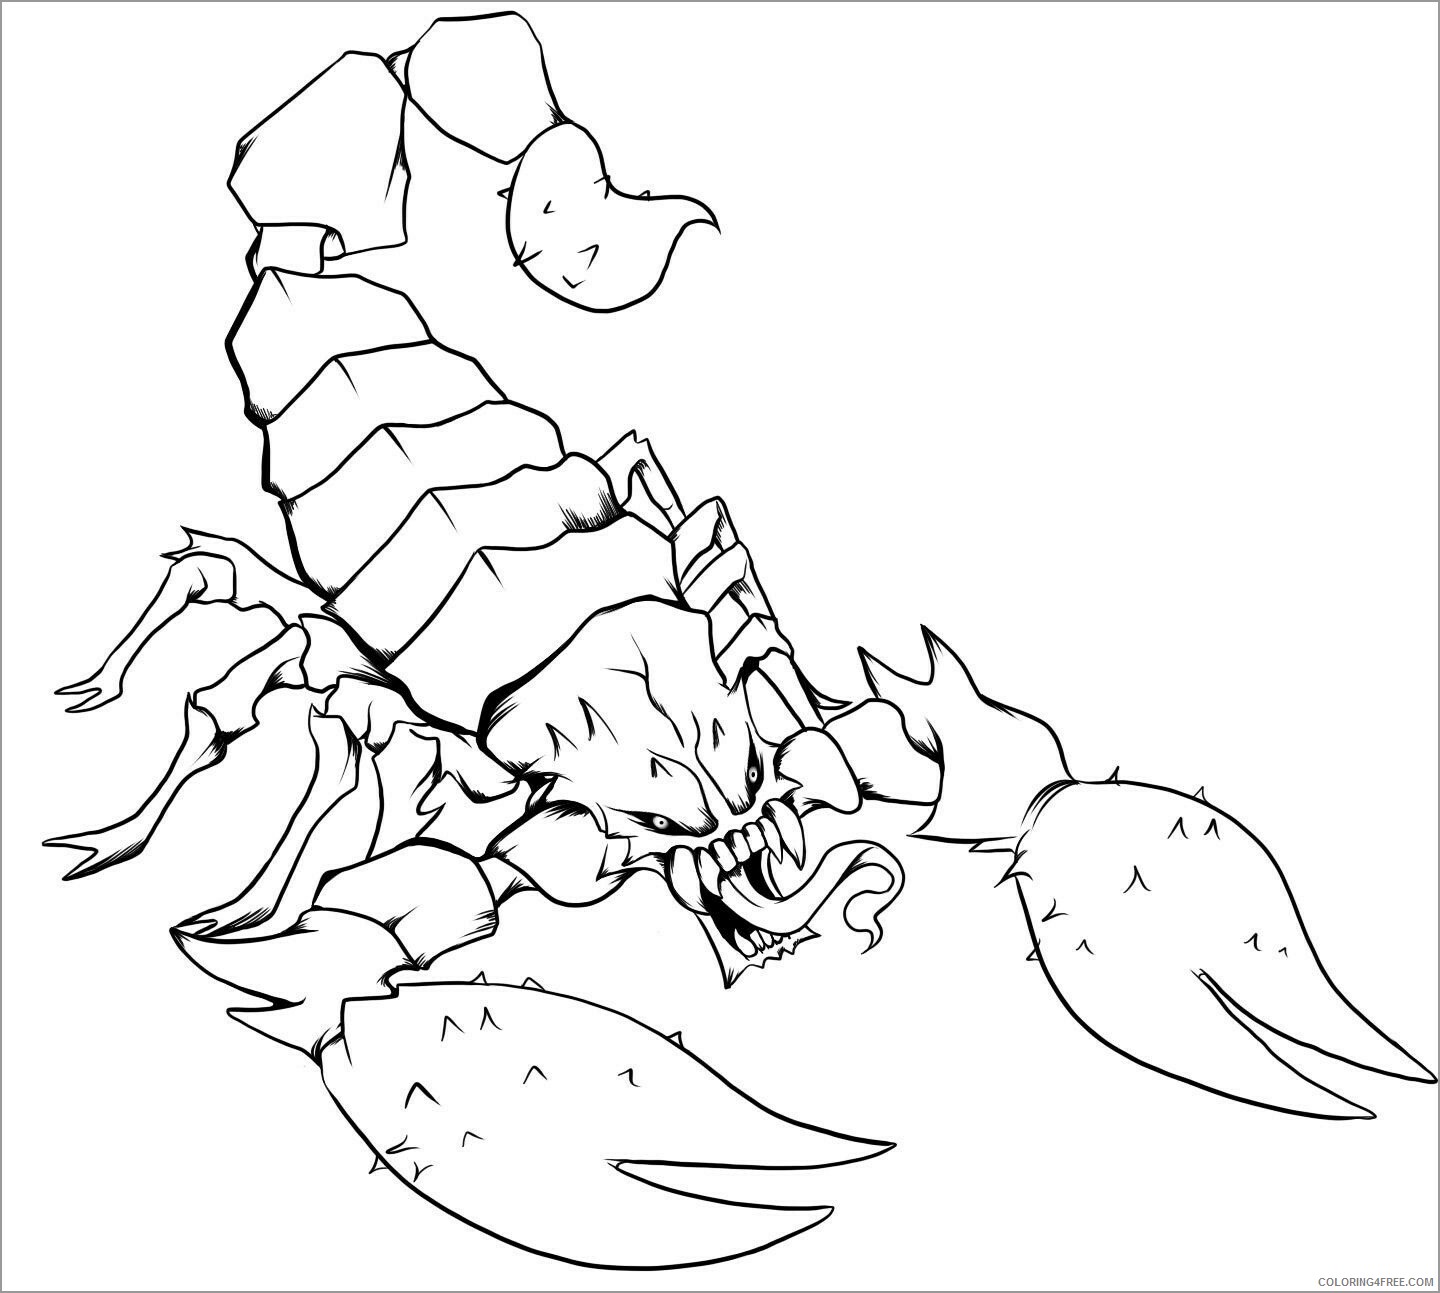 Scorpio Coloring Pages Animal Printable Sheets printable scorpio for kids 2021 Coloring4free